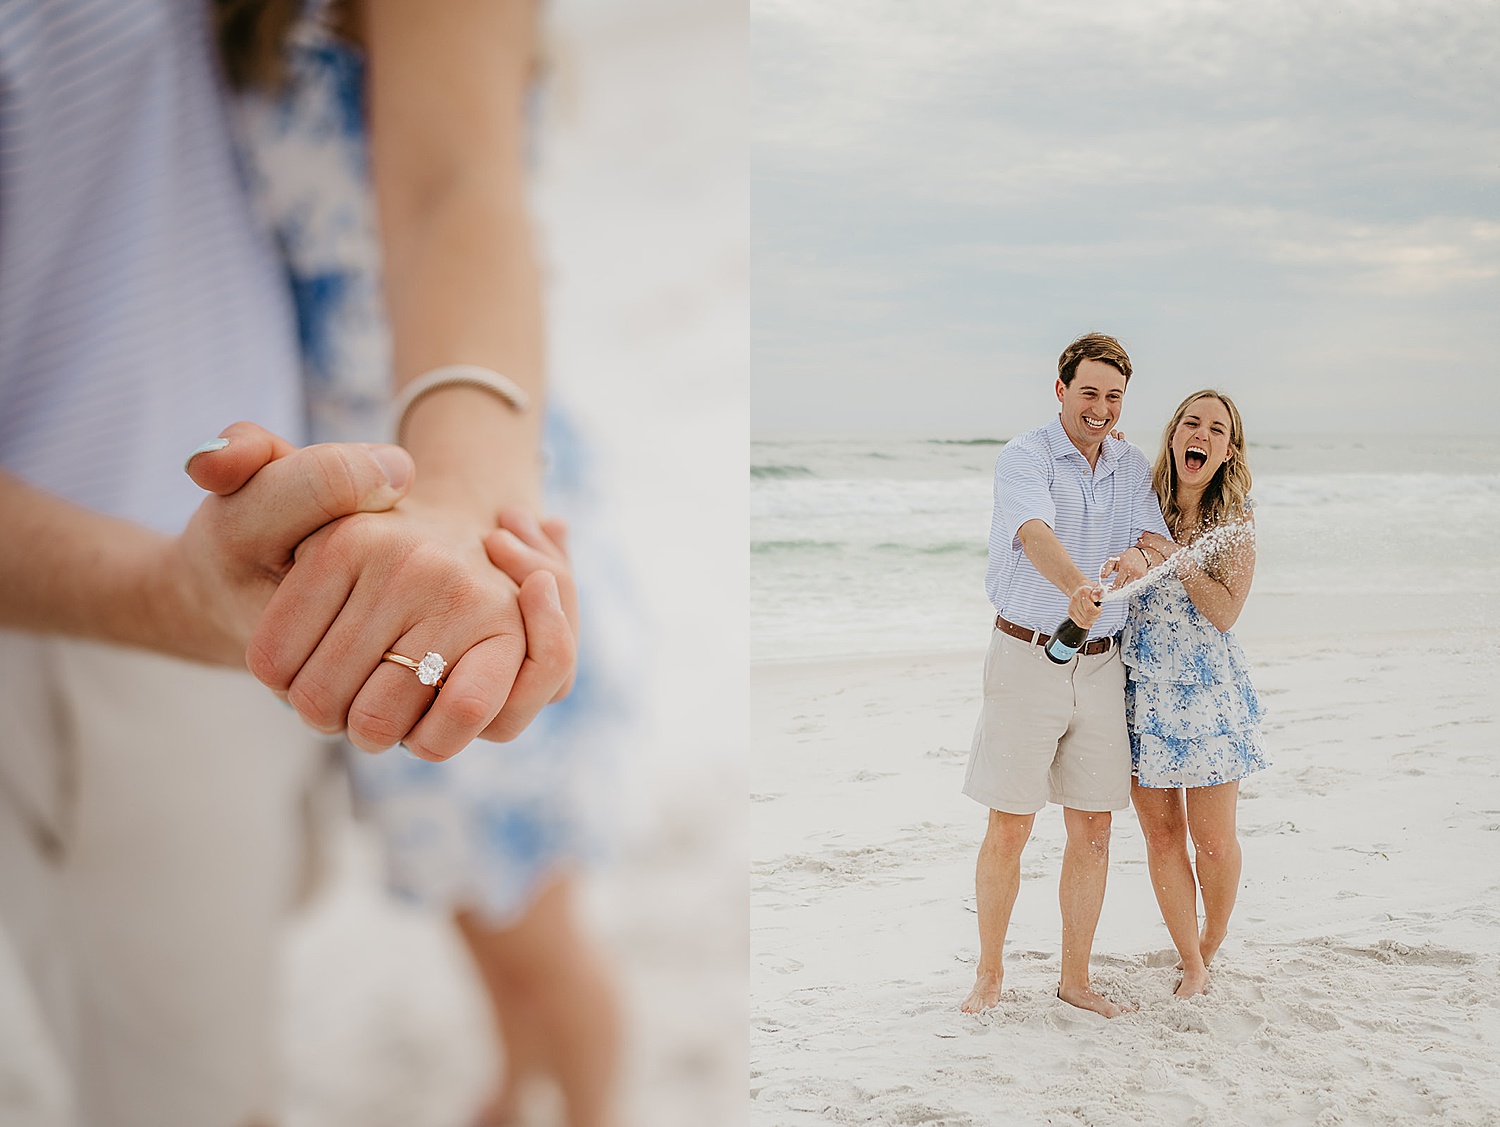 Engaged couple pop bottle of champagne after beach surprise proposal in Florida